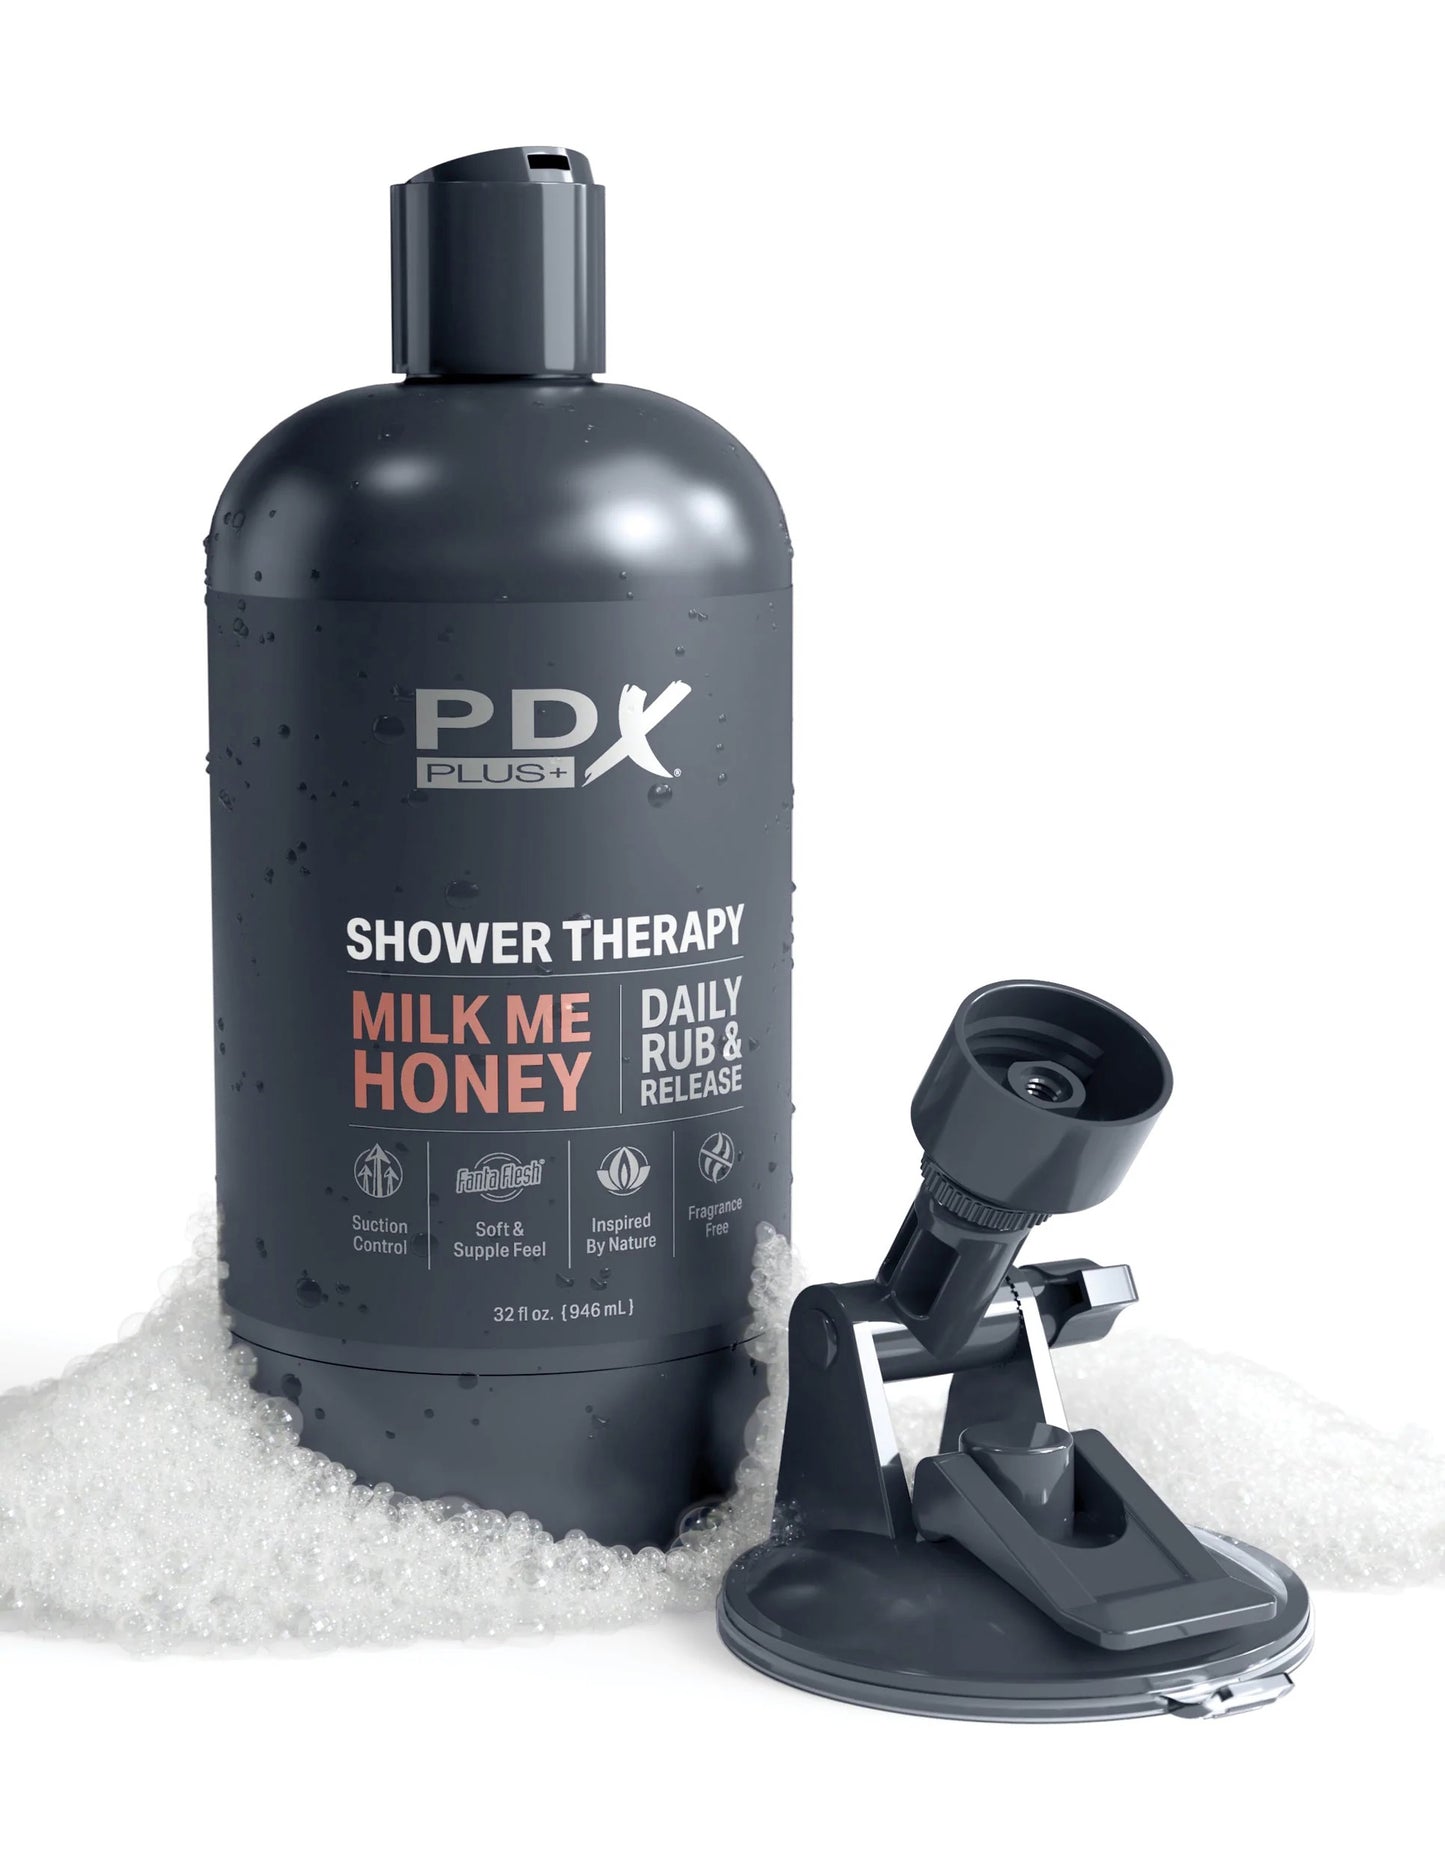 Shower Therapy - Milk Me Honey - Tan PDRD621-22